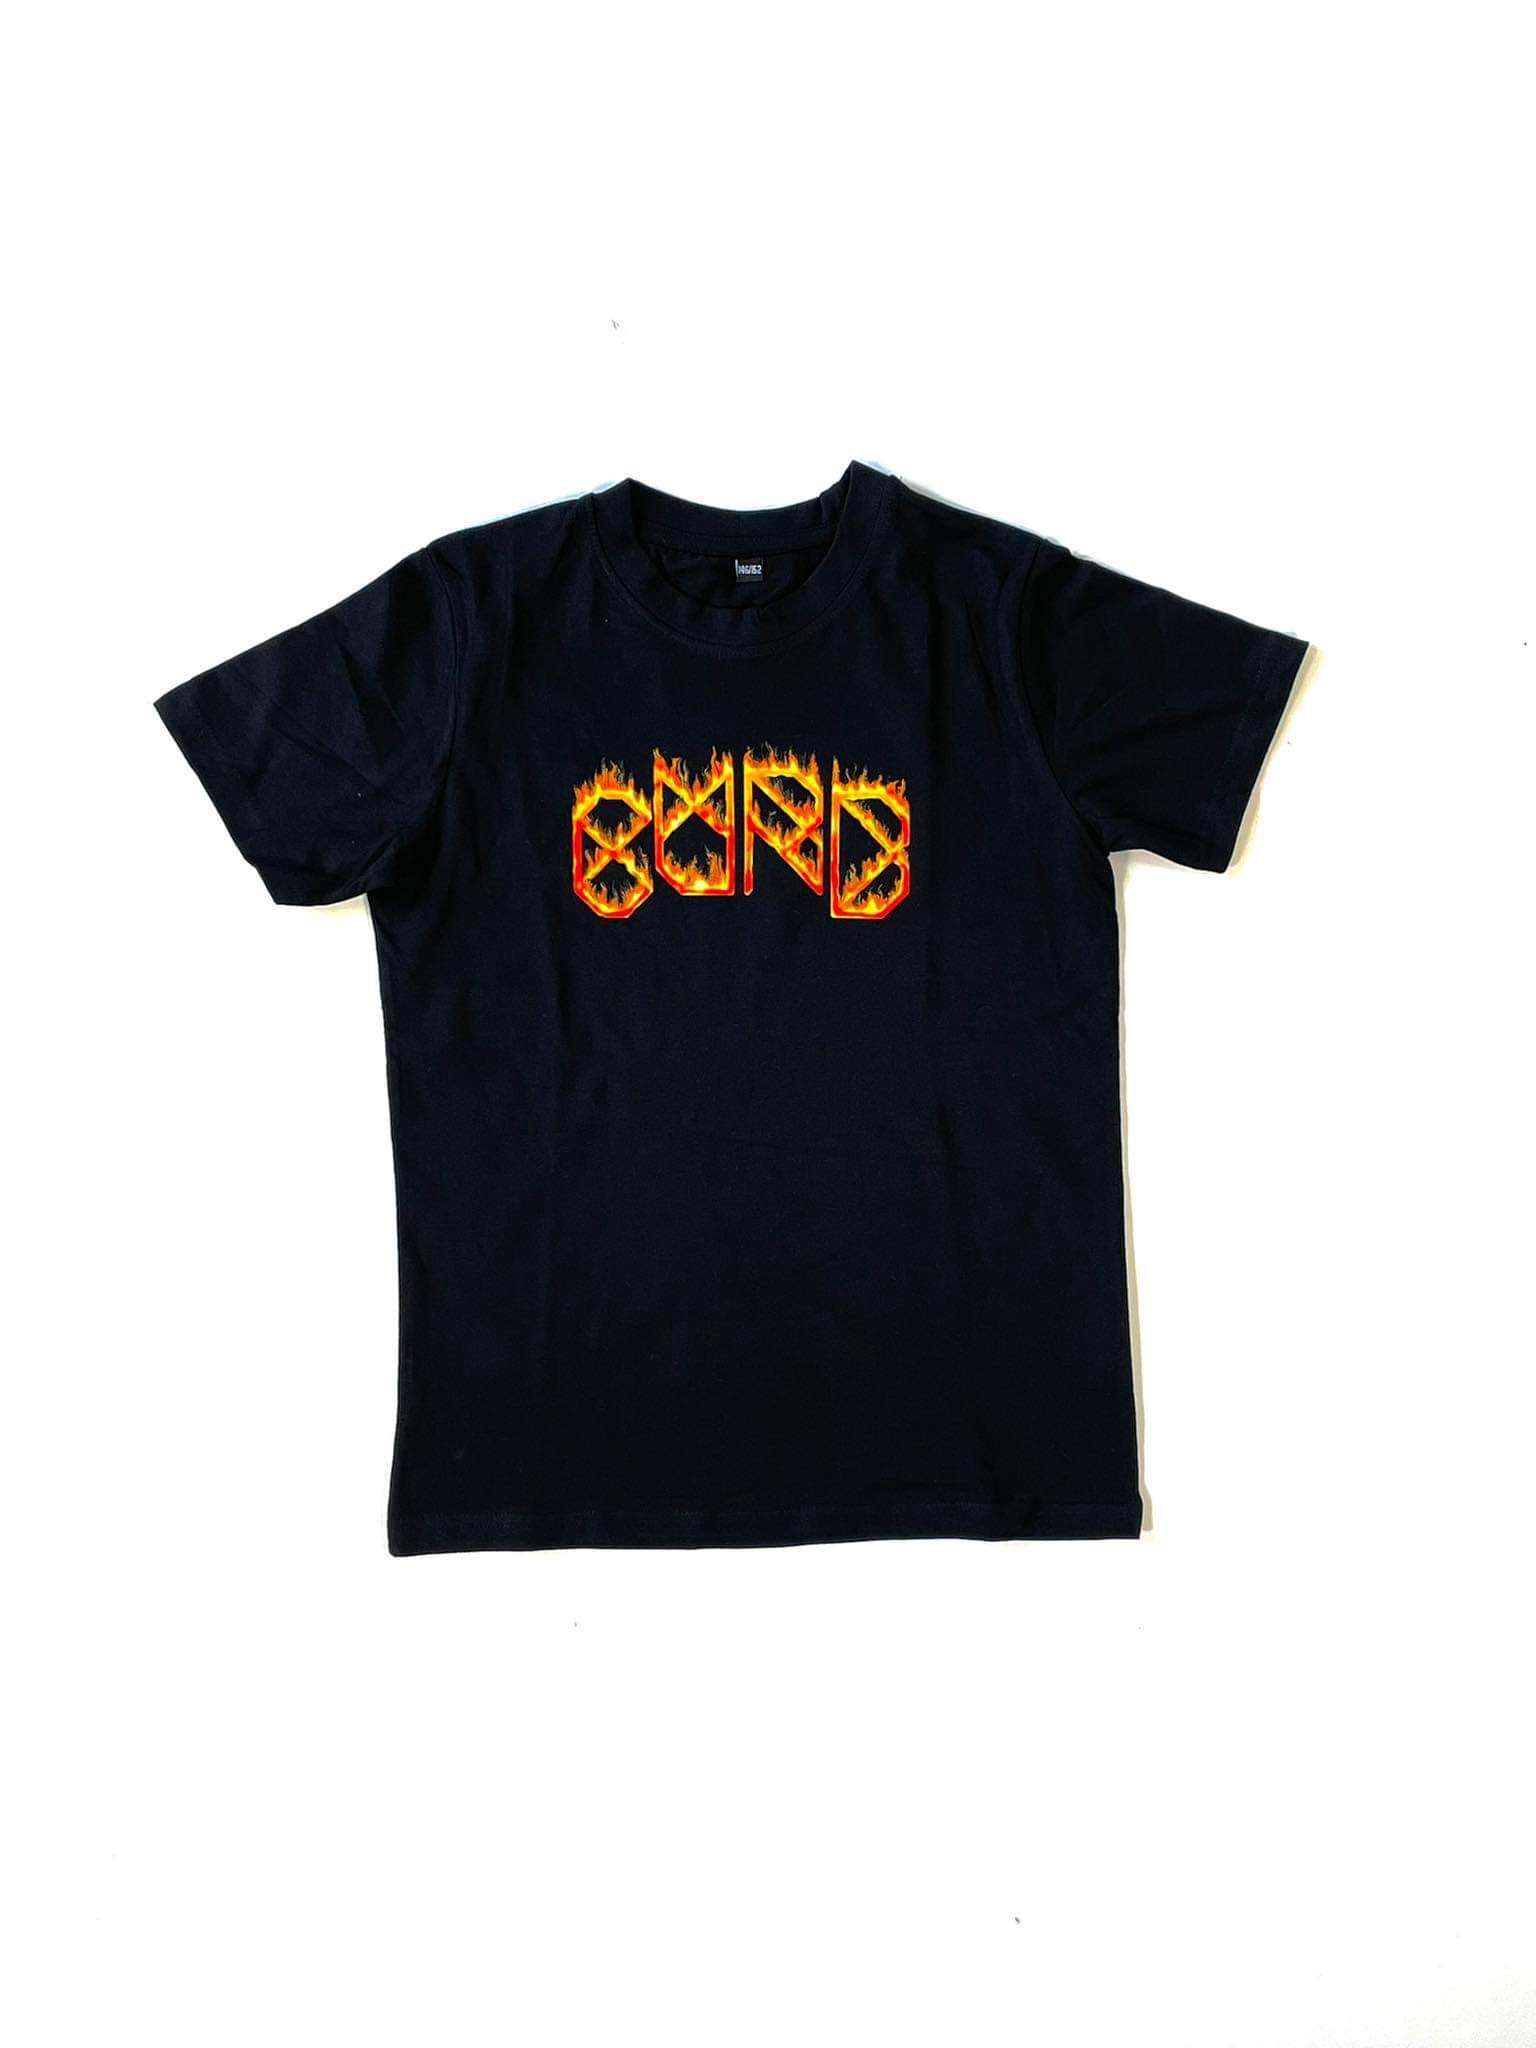 Curb Classic Flame Tee Black Youth